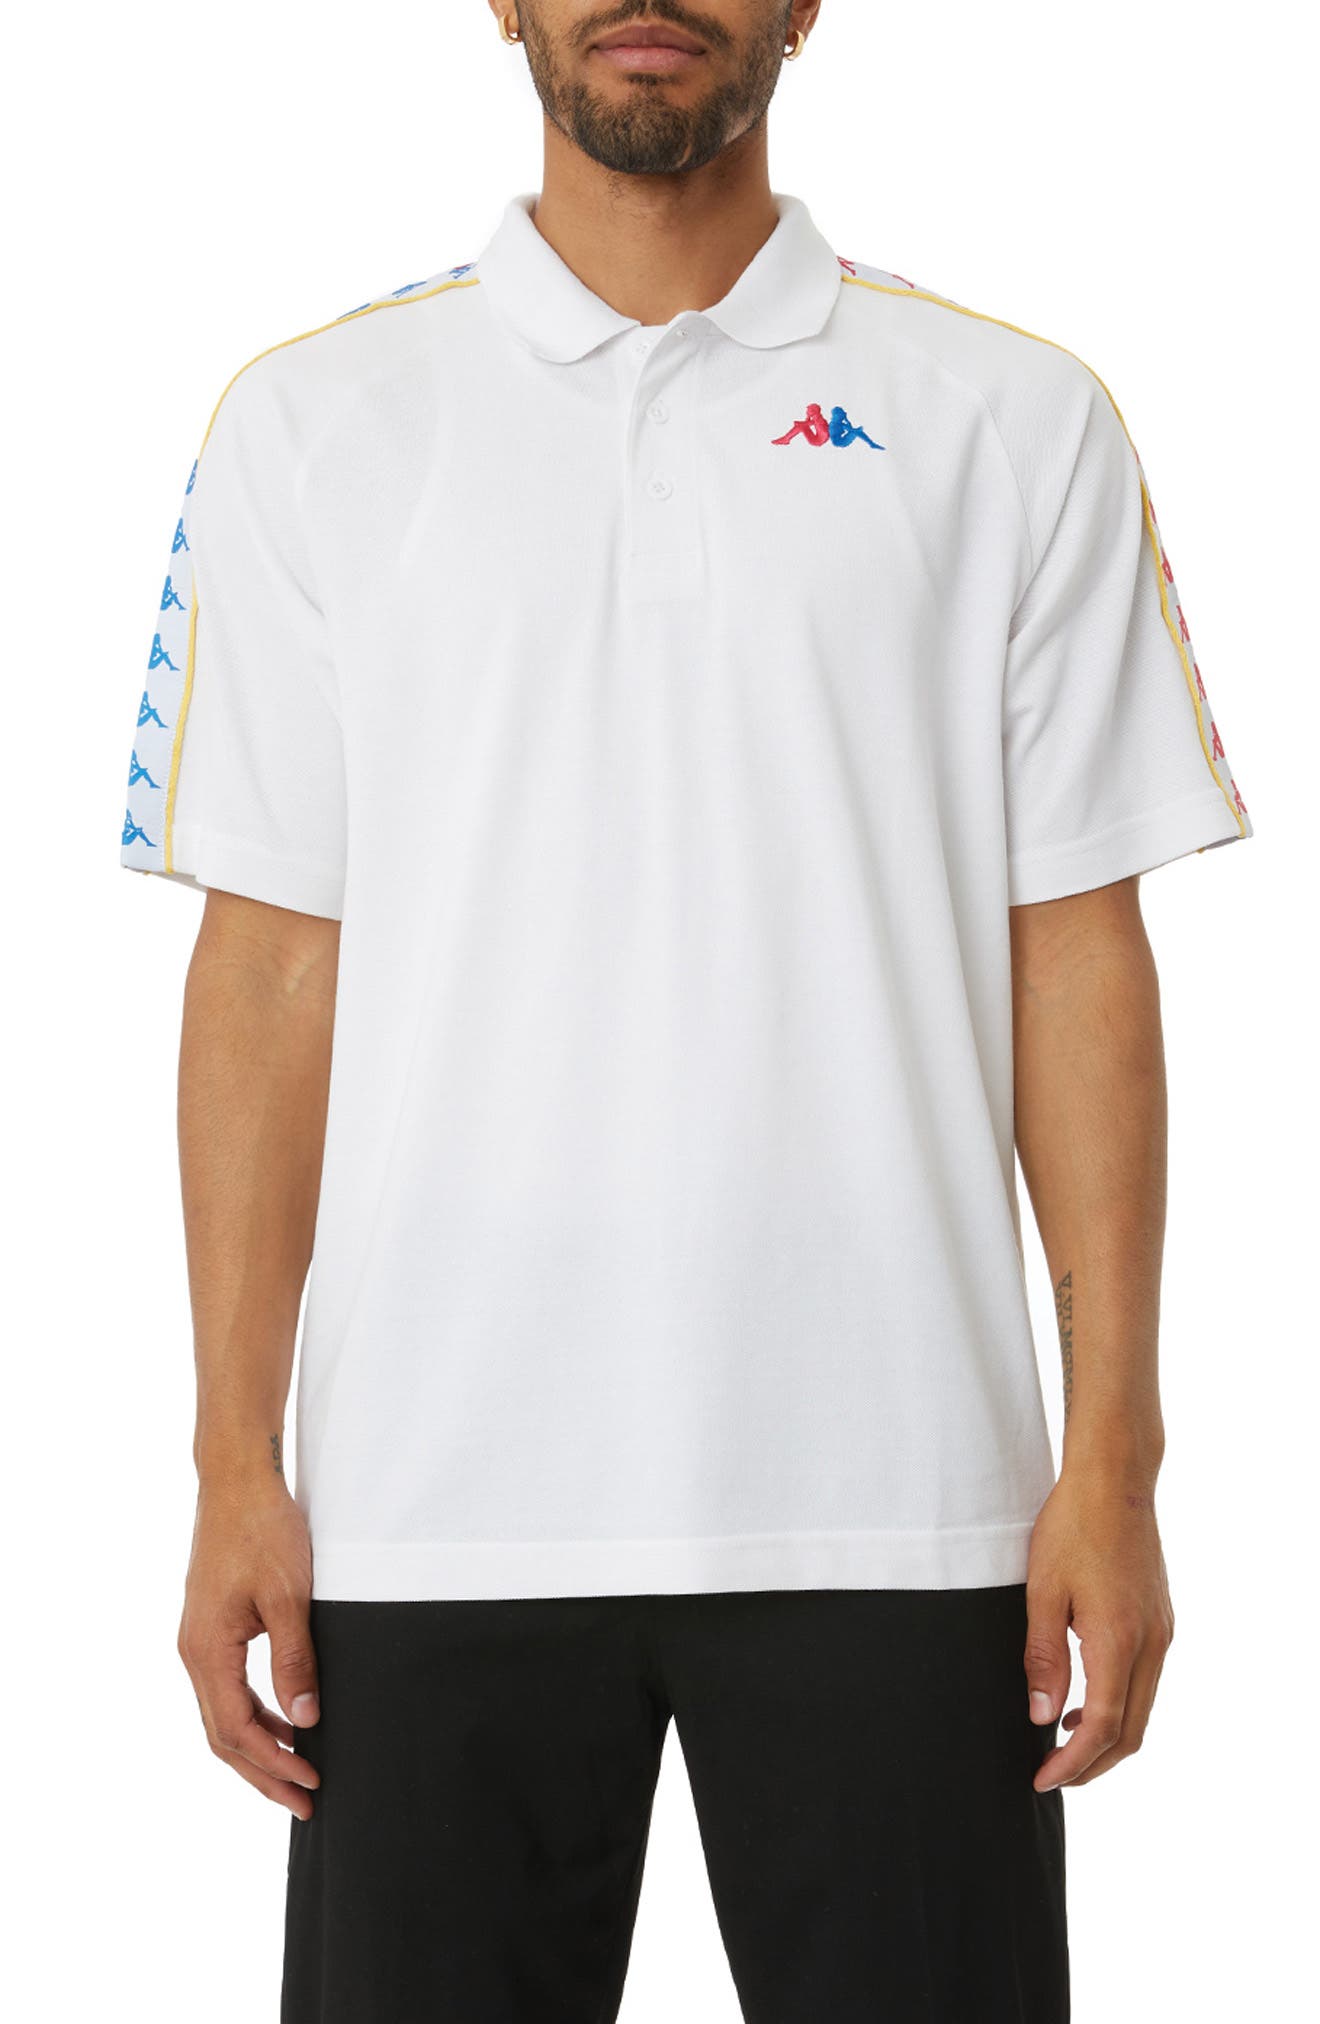 Kappa 222 Banda Linstead Polo Shirt in White/Fuchsia/Blue/Yellow at Nordstrom, Size Small